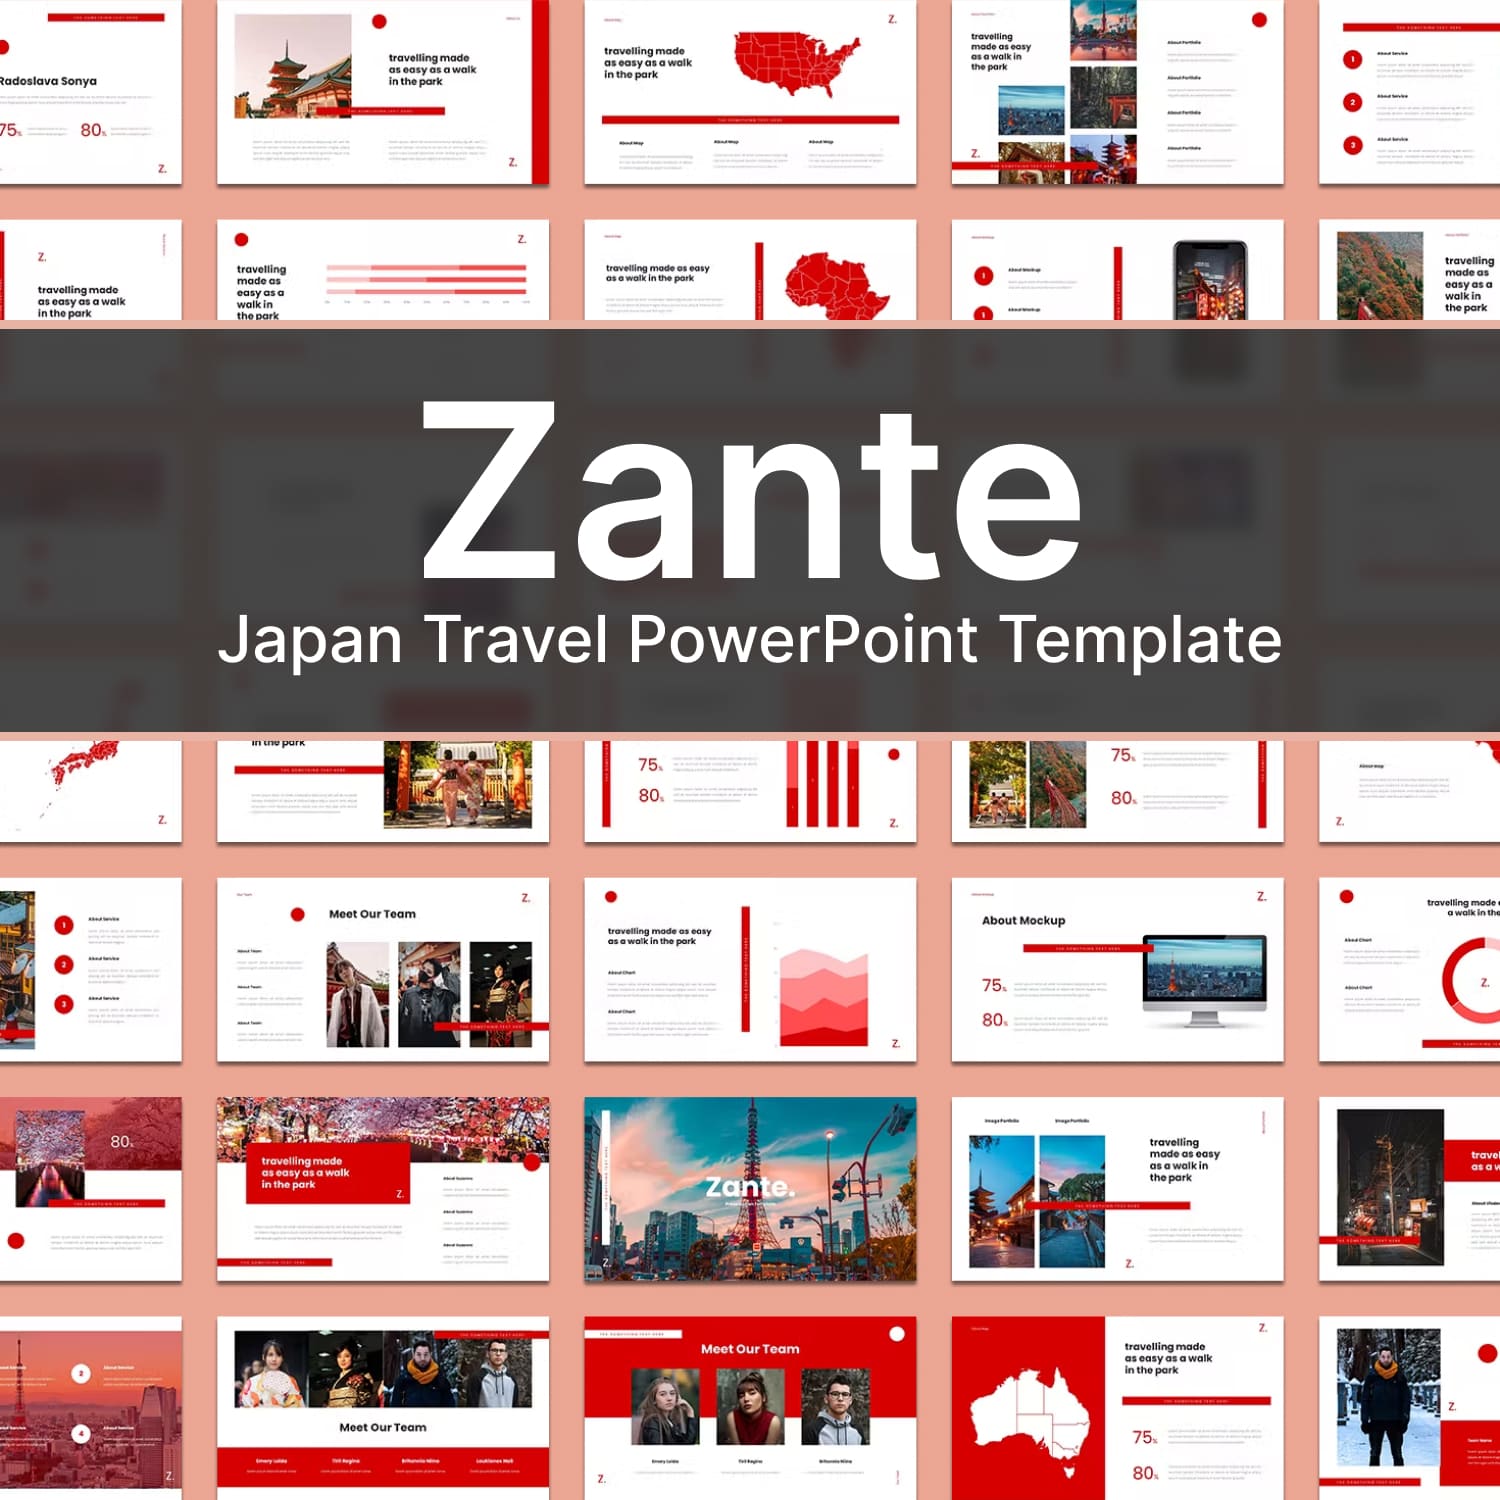 Zante japan travel powerpoint template - main image preview.